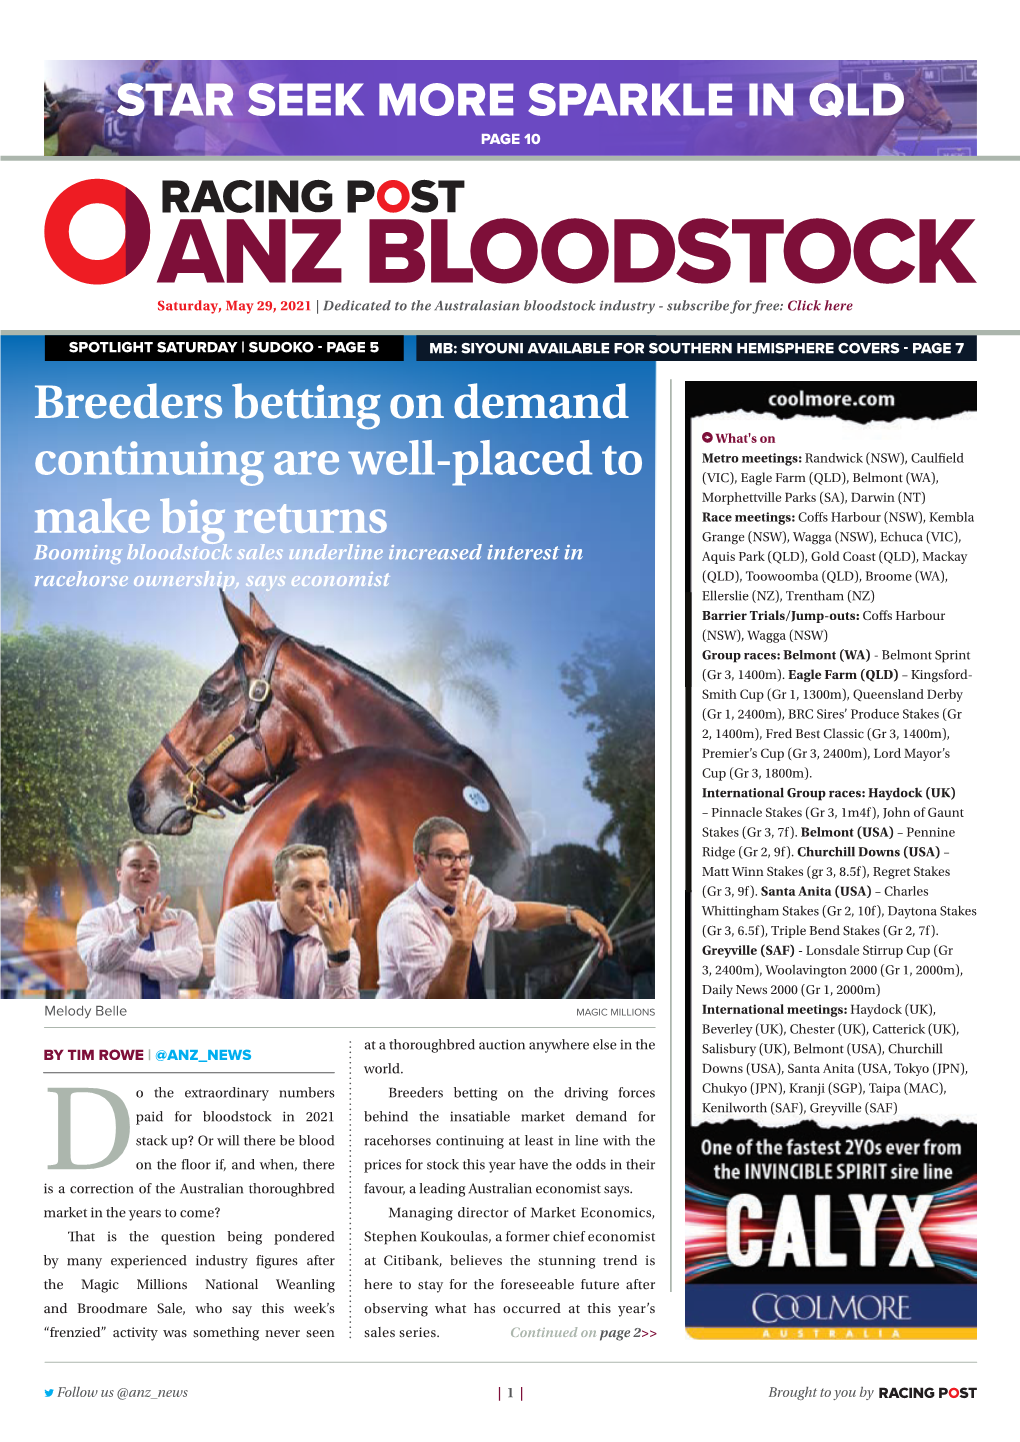 Breeders Betting on Demand Continuing Are Well-Placed to Make Big Returns Saturday, May 29, 2021